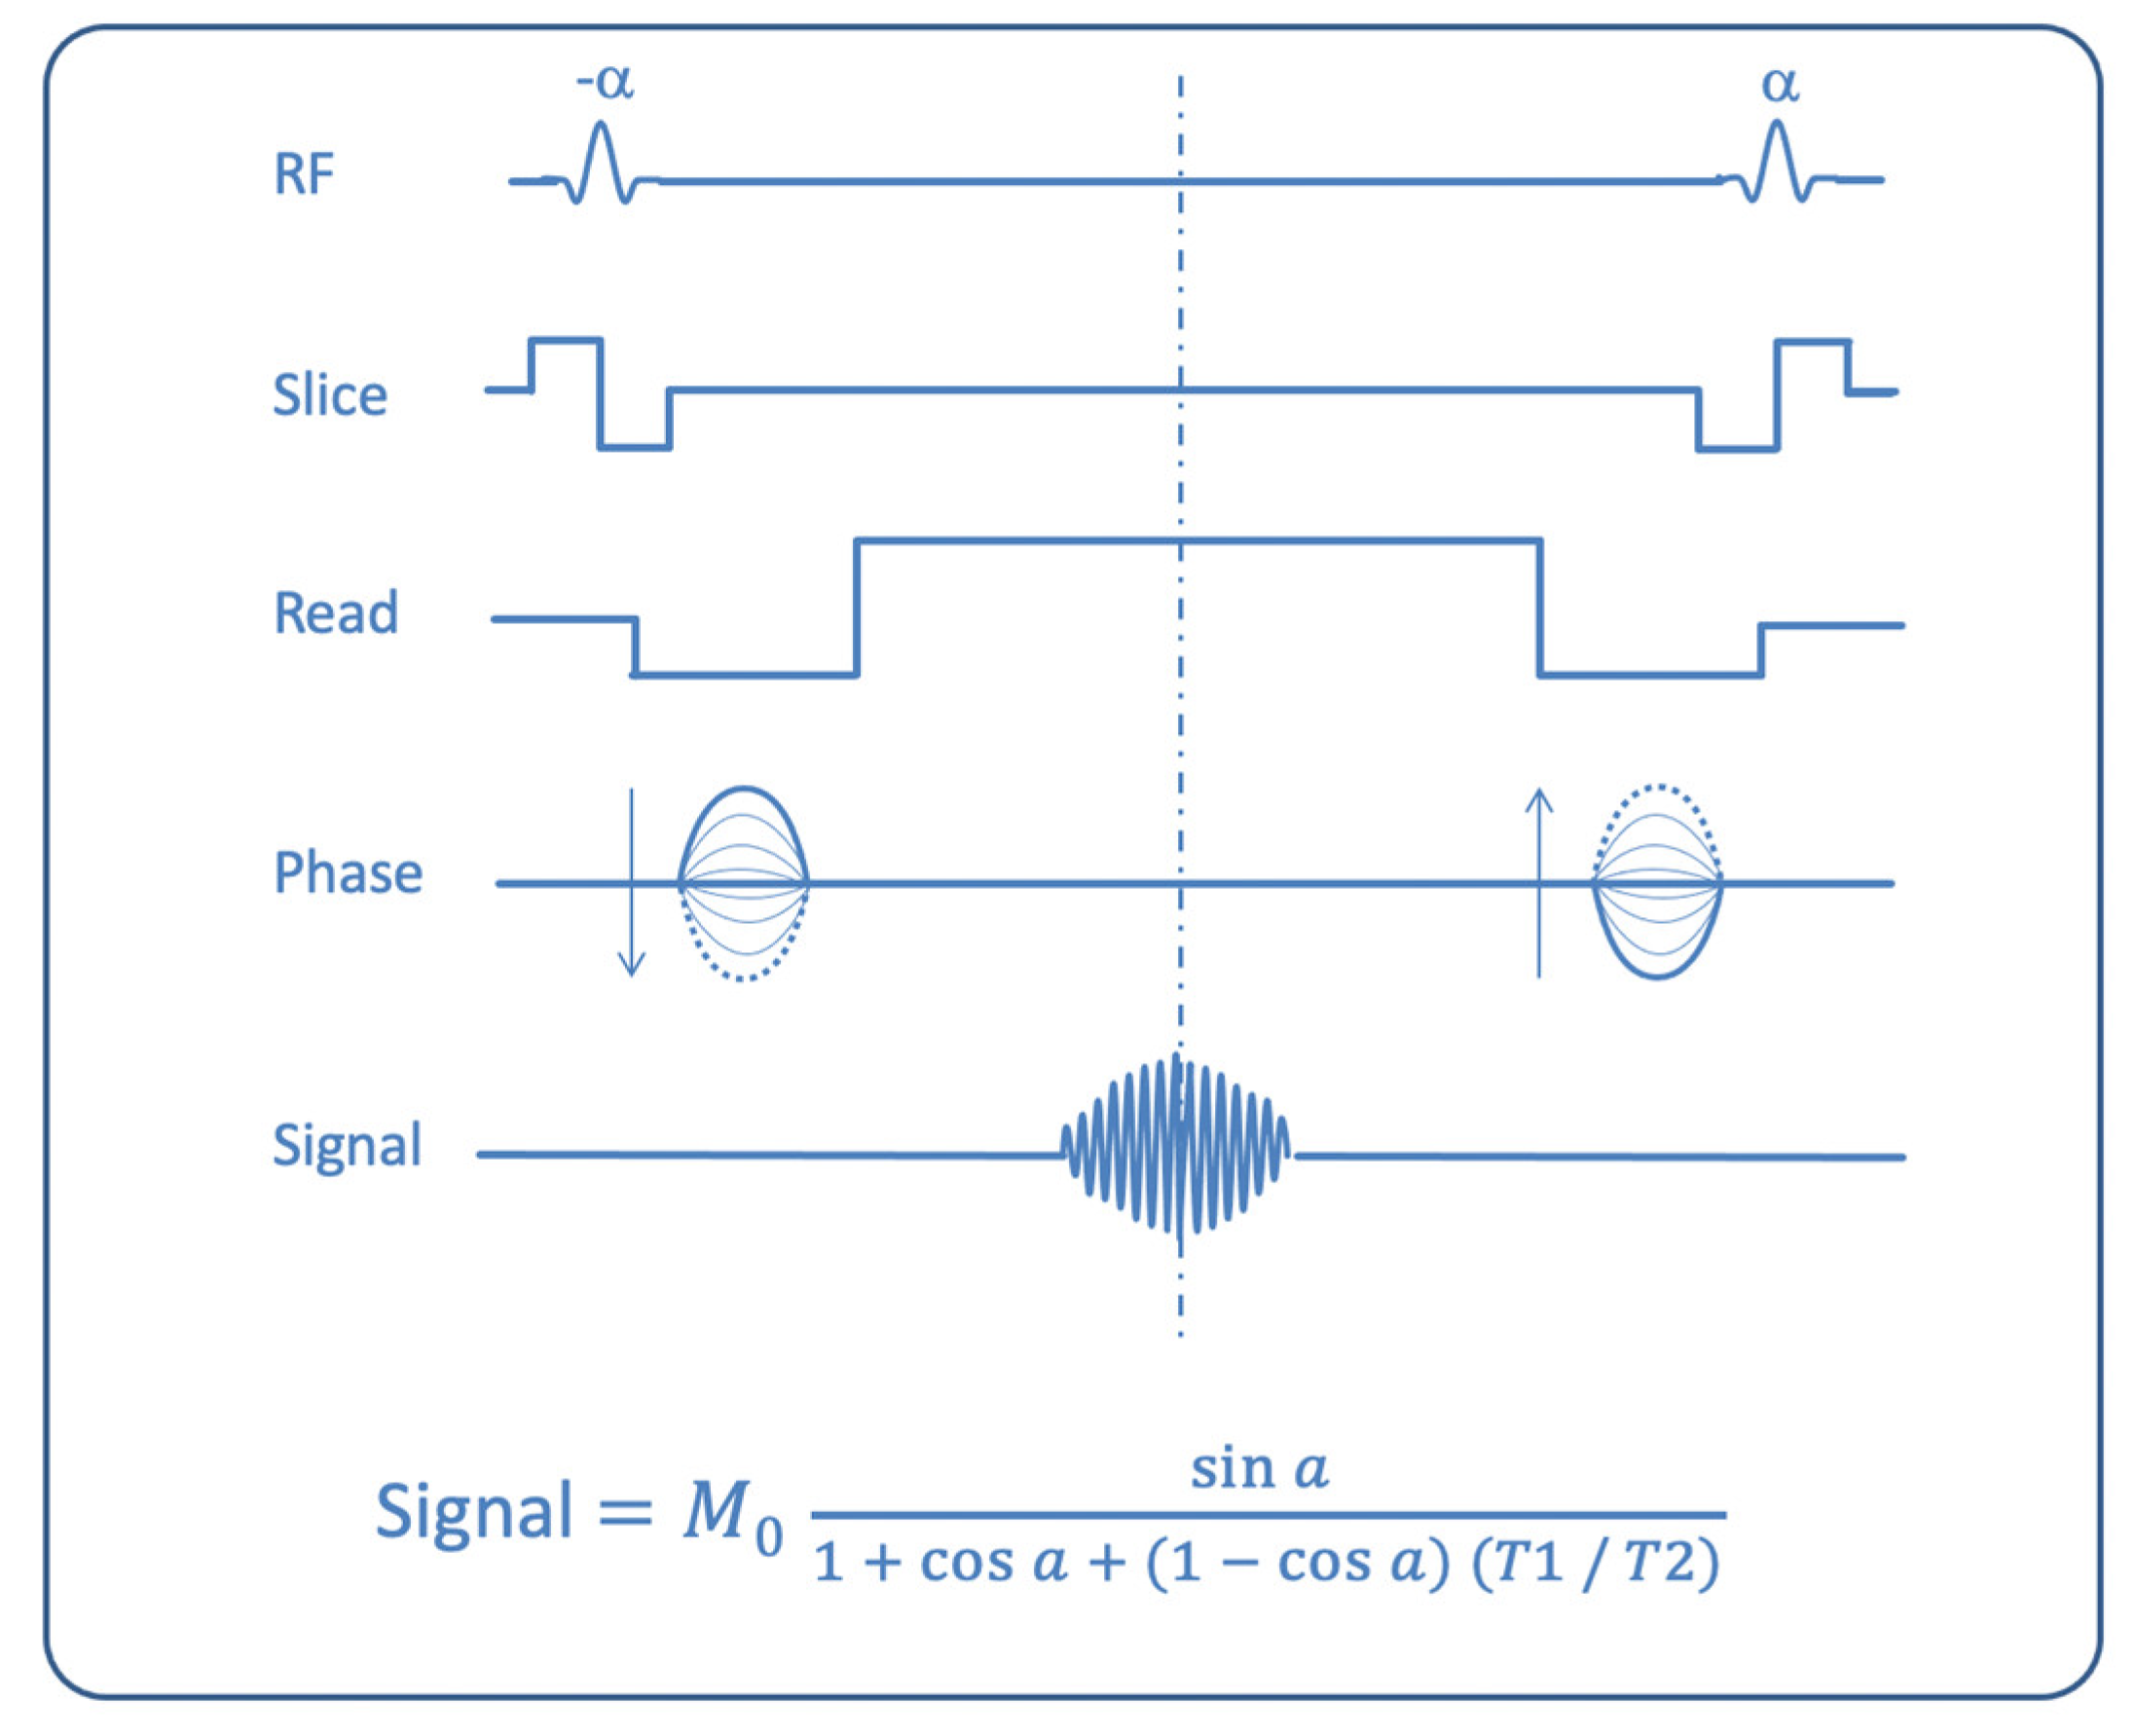 An example of non-contrast 3D turbo fi eld echo T1-weighted sequence of